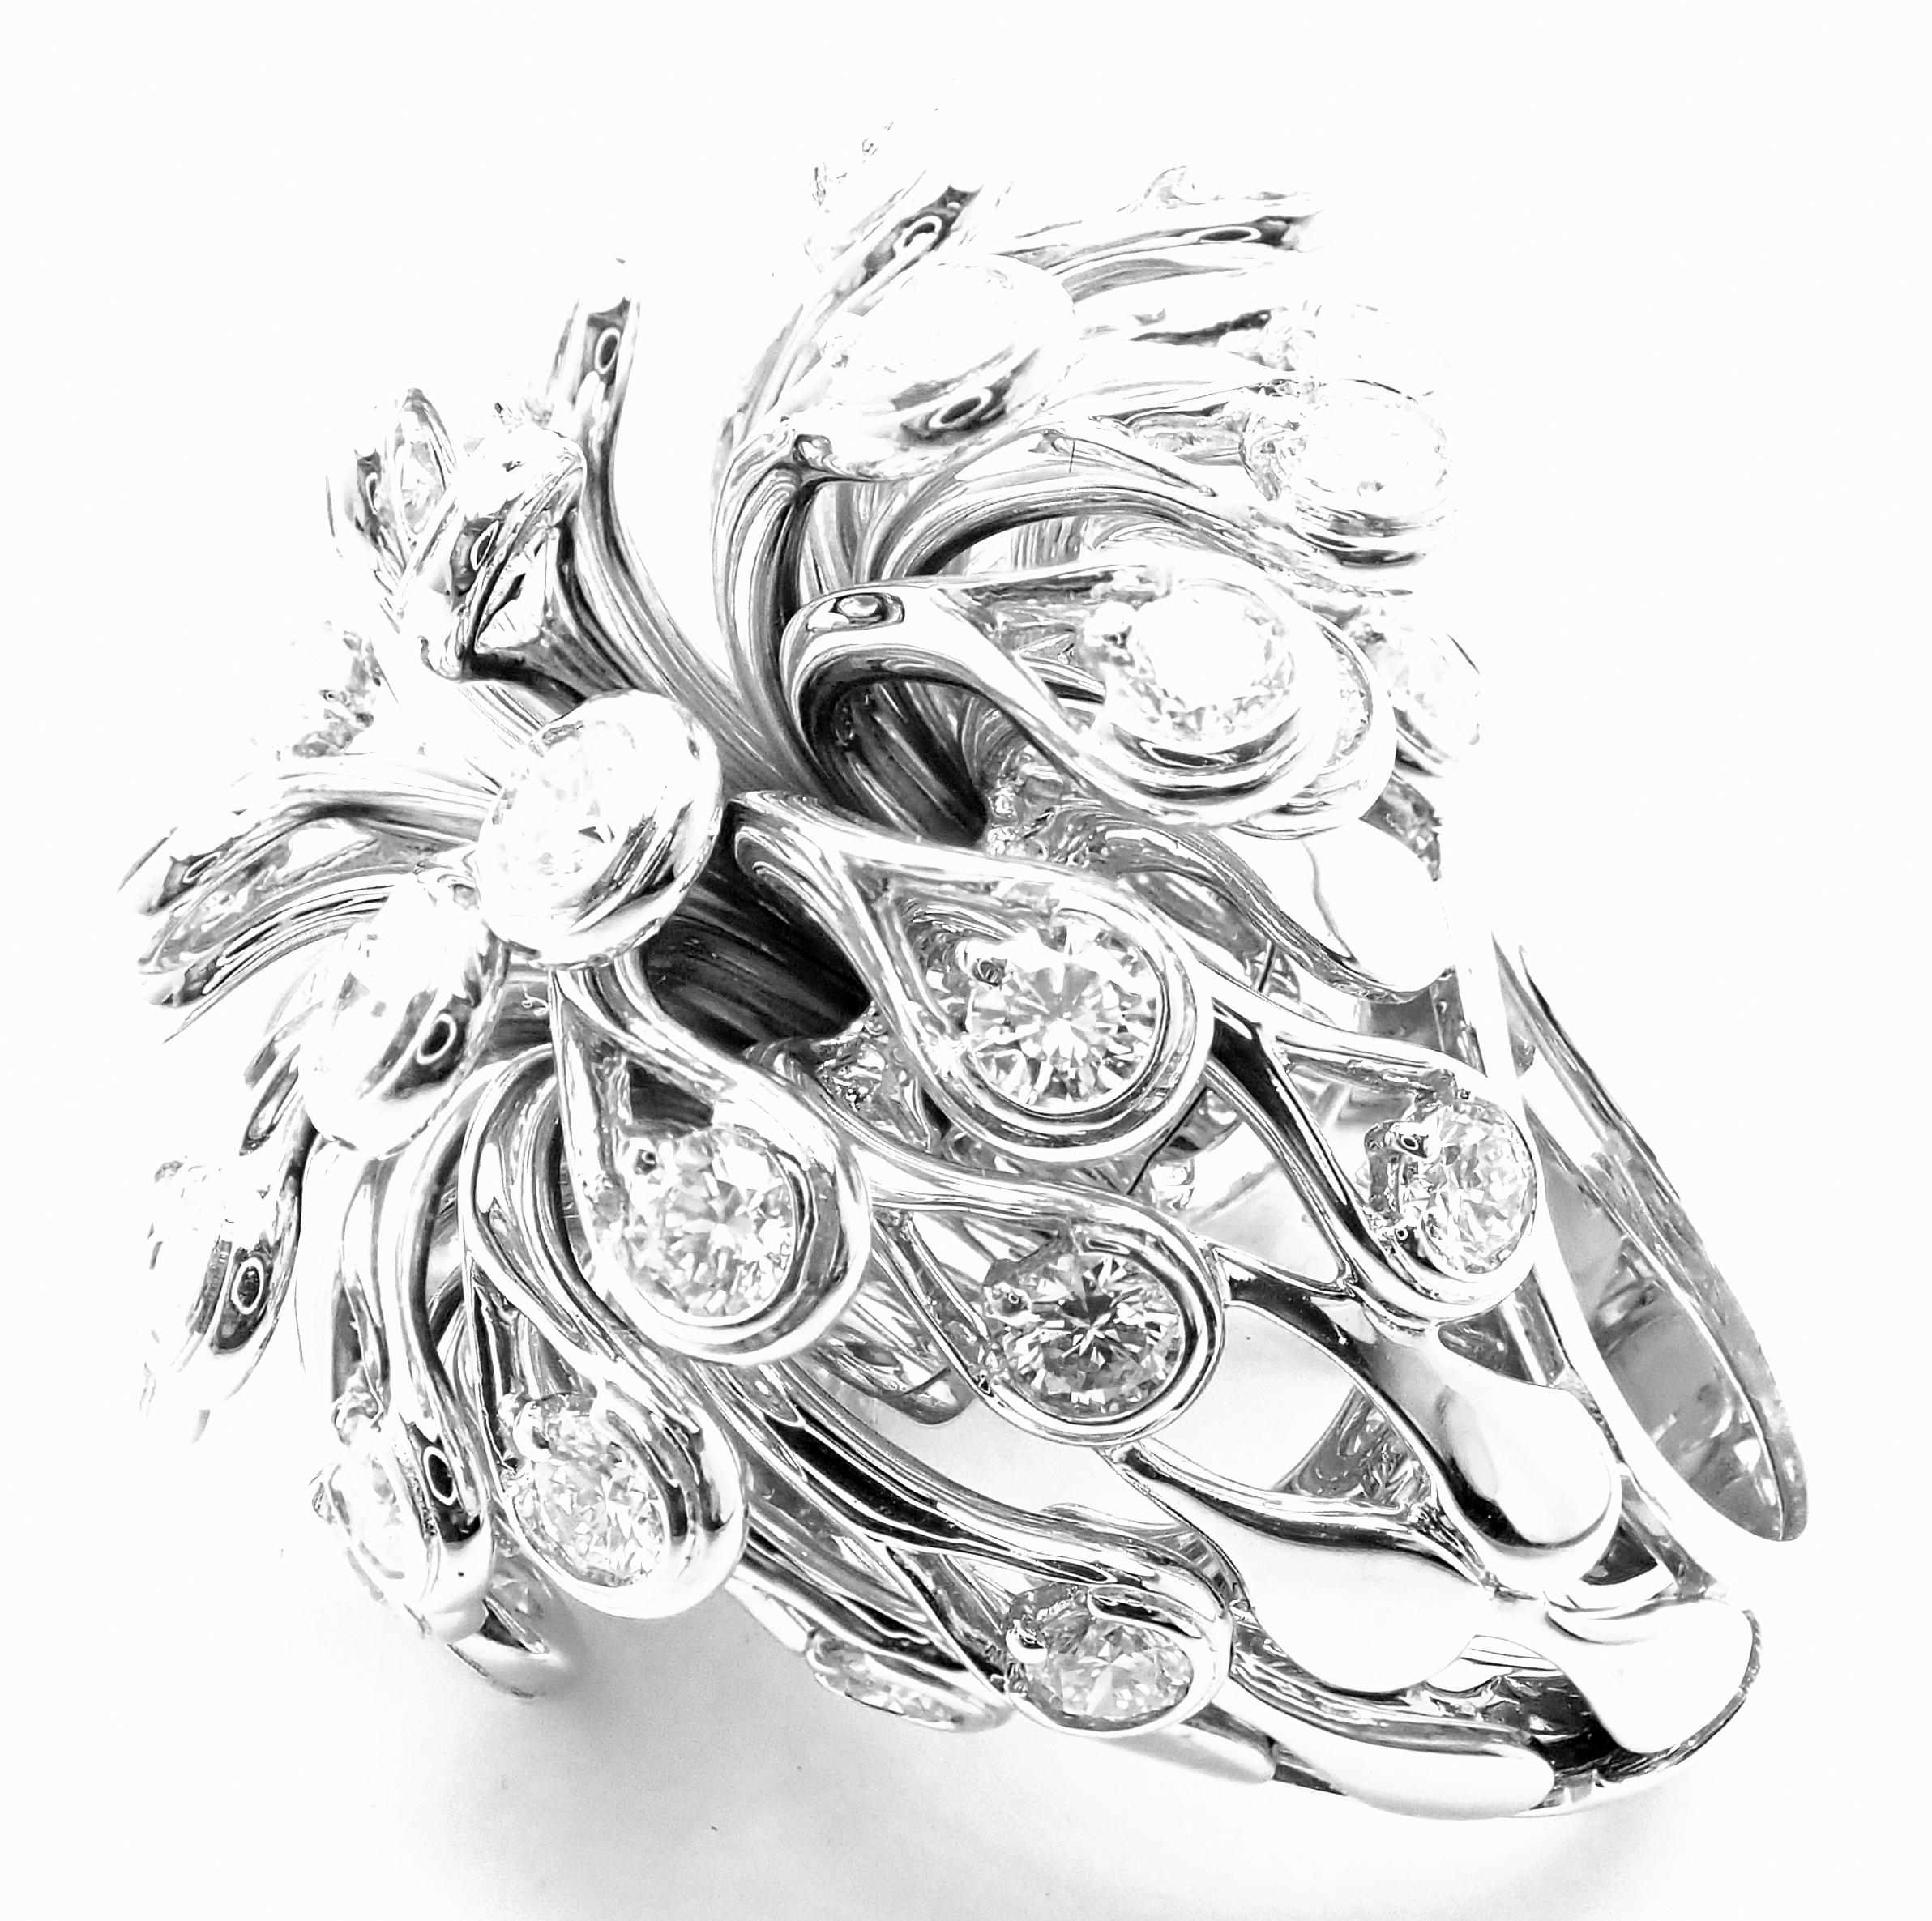 18k White Gold Large Flower Diamond Ring by Christian Dior. 
With Round brilliant round cut diamonds VVS1 clarity, E color total weight approx. 6.50ct
Details: 
Size: European 53, US 6 1/4
Weight: 58 grams
Width: 37mm
Stamped Hallmarks: Dior 750 53